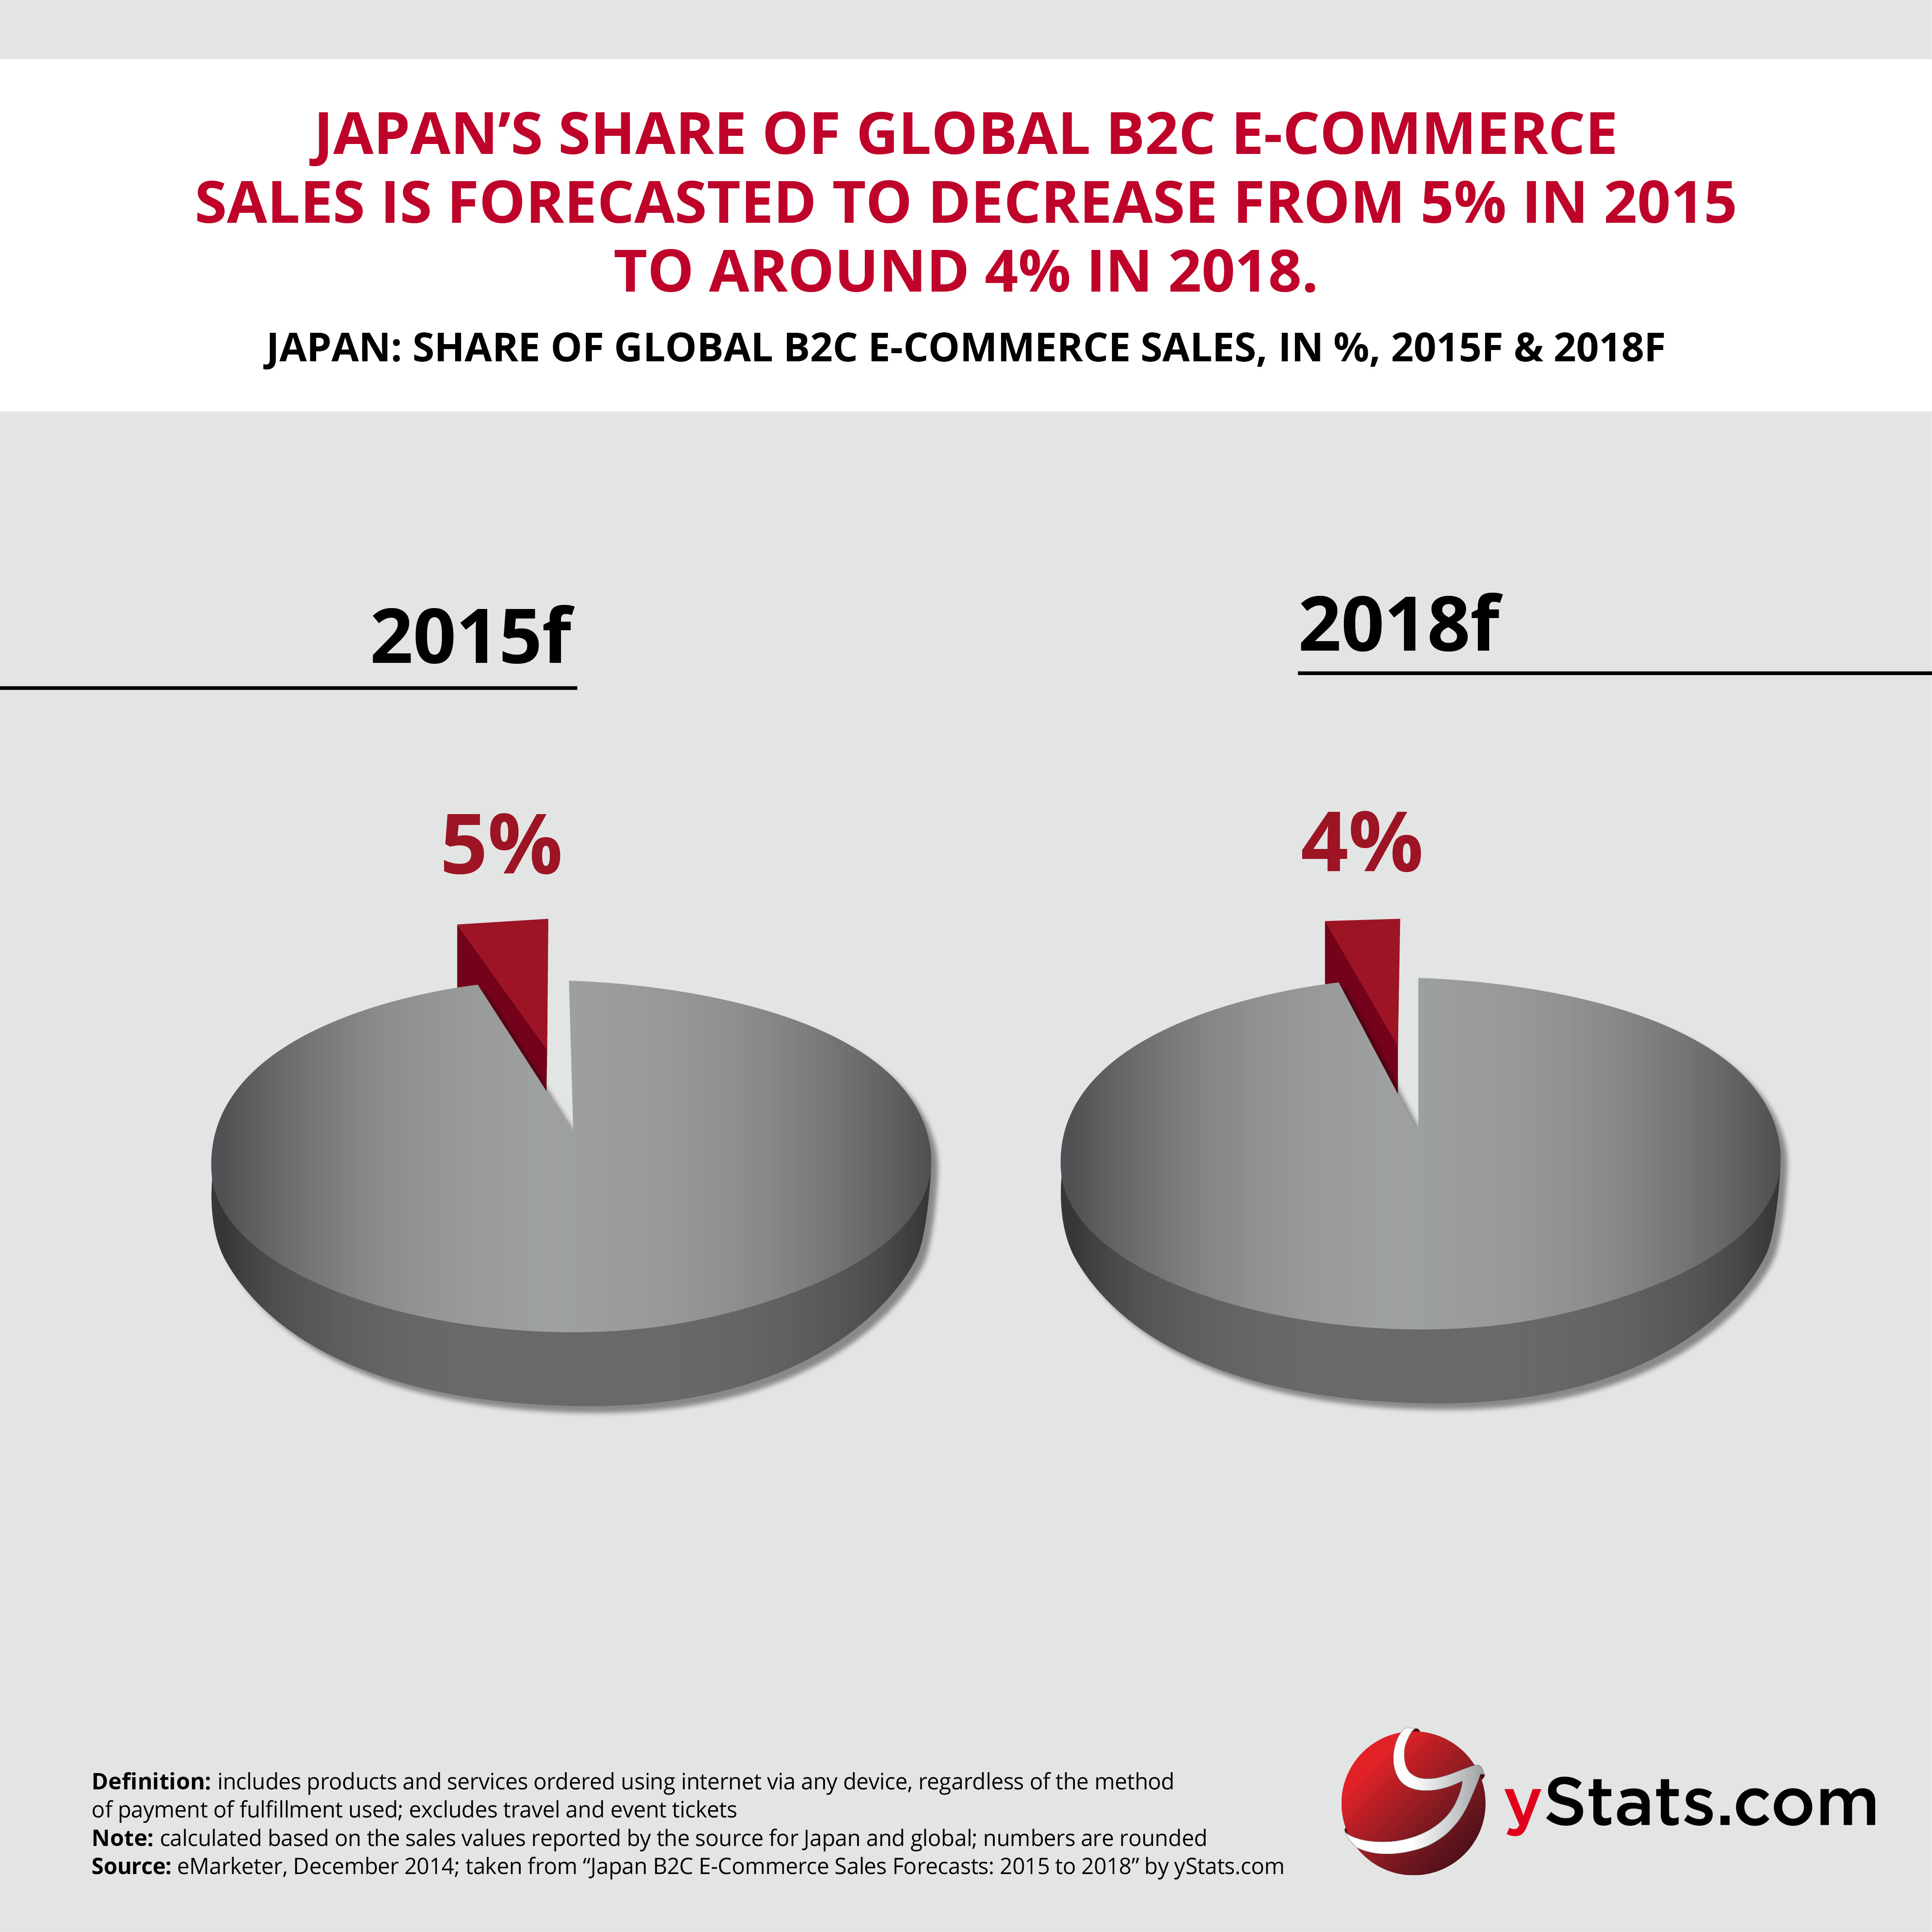 yStats.com Infographic Japan B2C E-Commerce Sales Forecasts 2015 to 2018